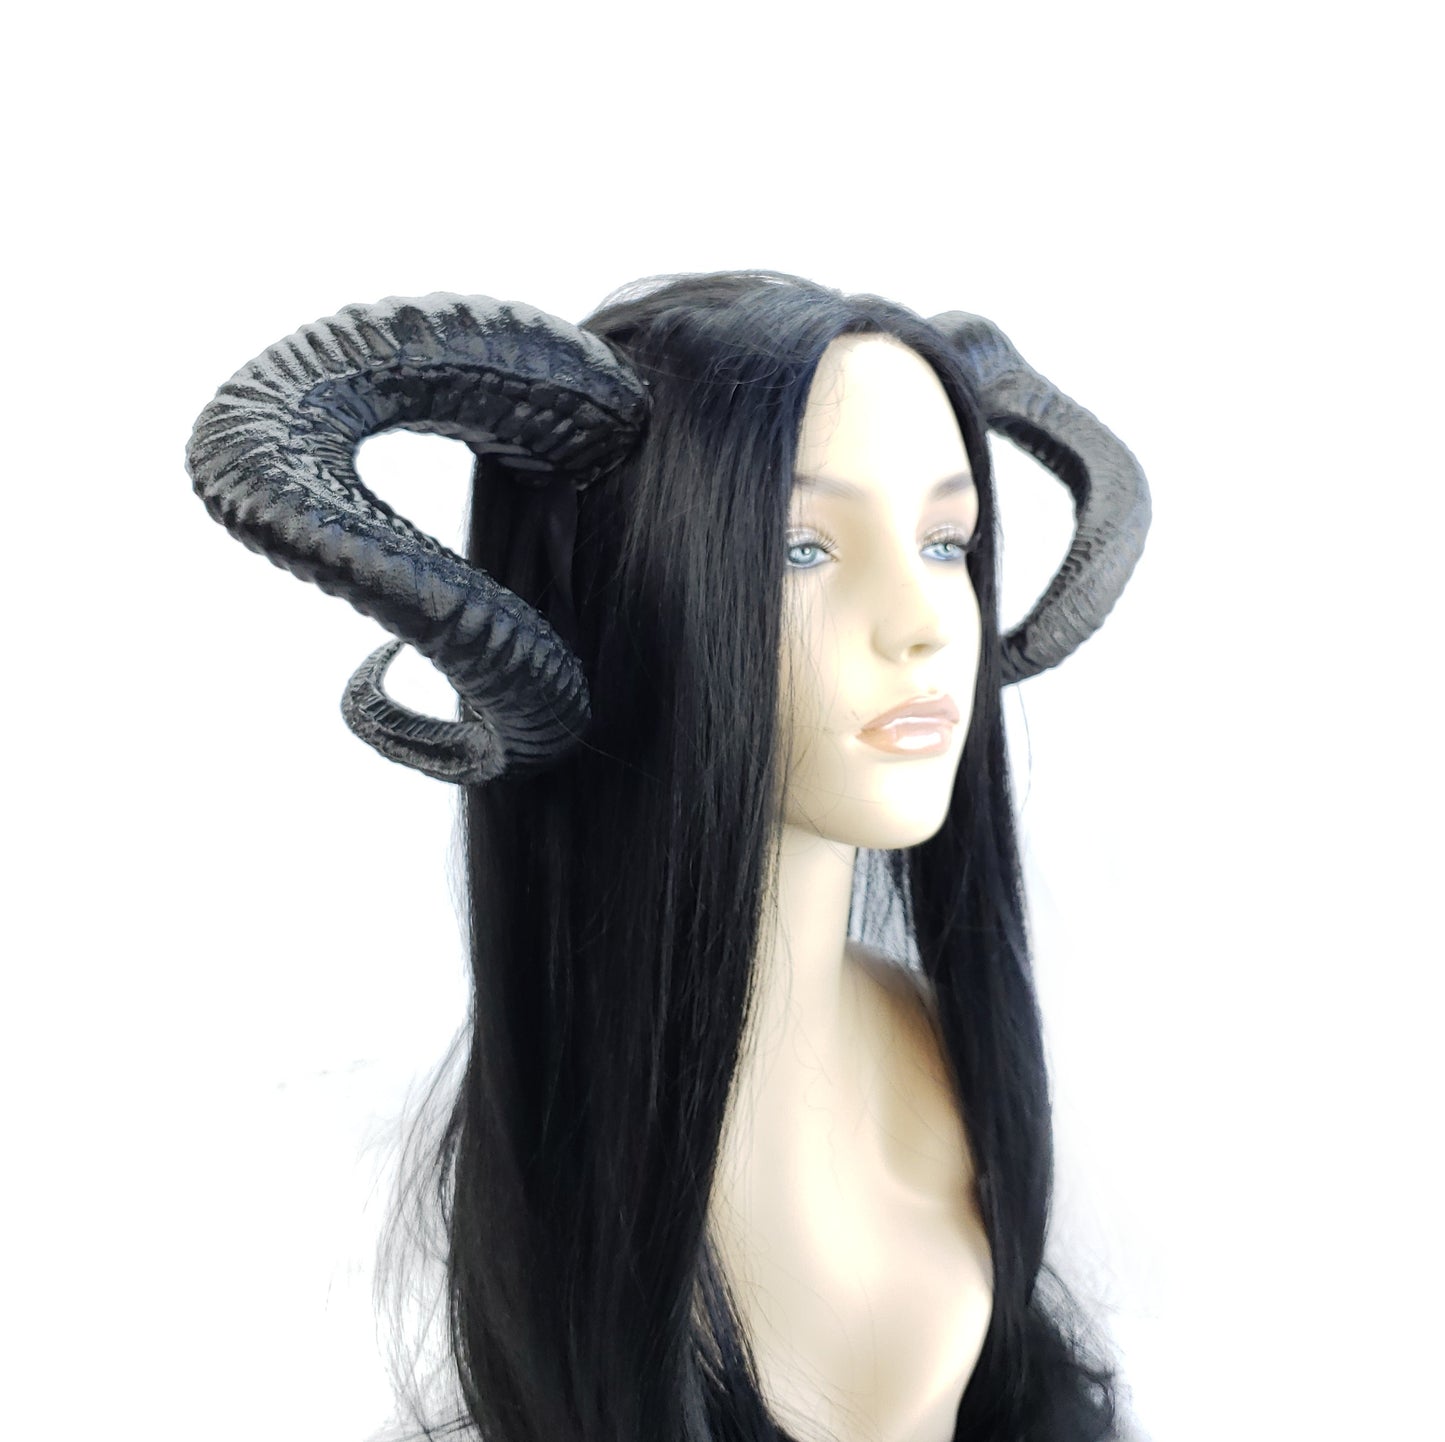 Ruler of Hades Costume and Cosplay Horns- Made to Order